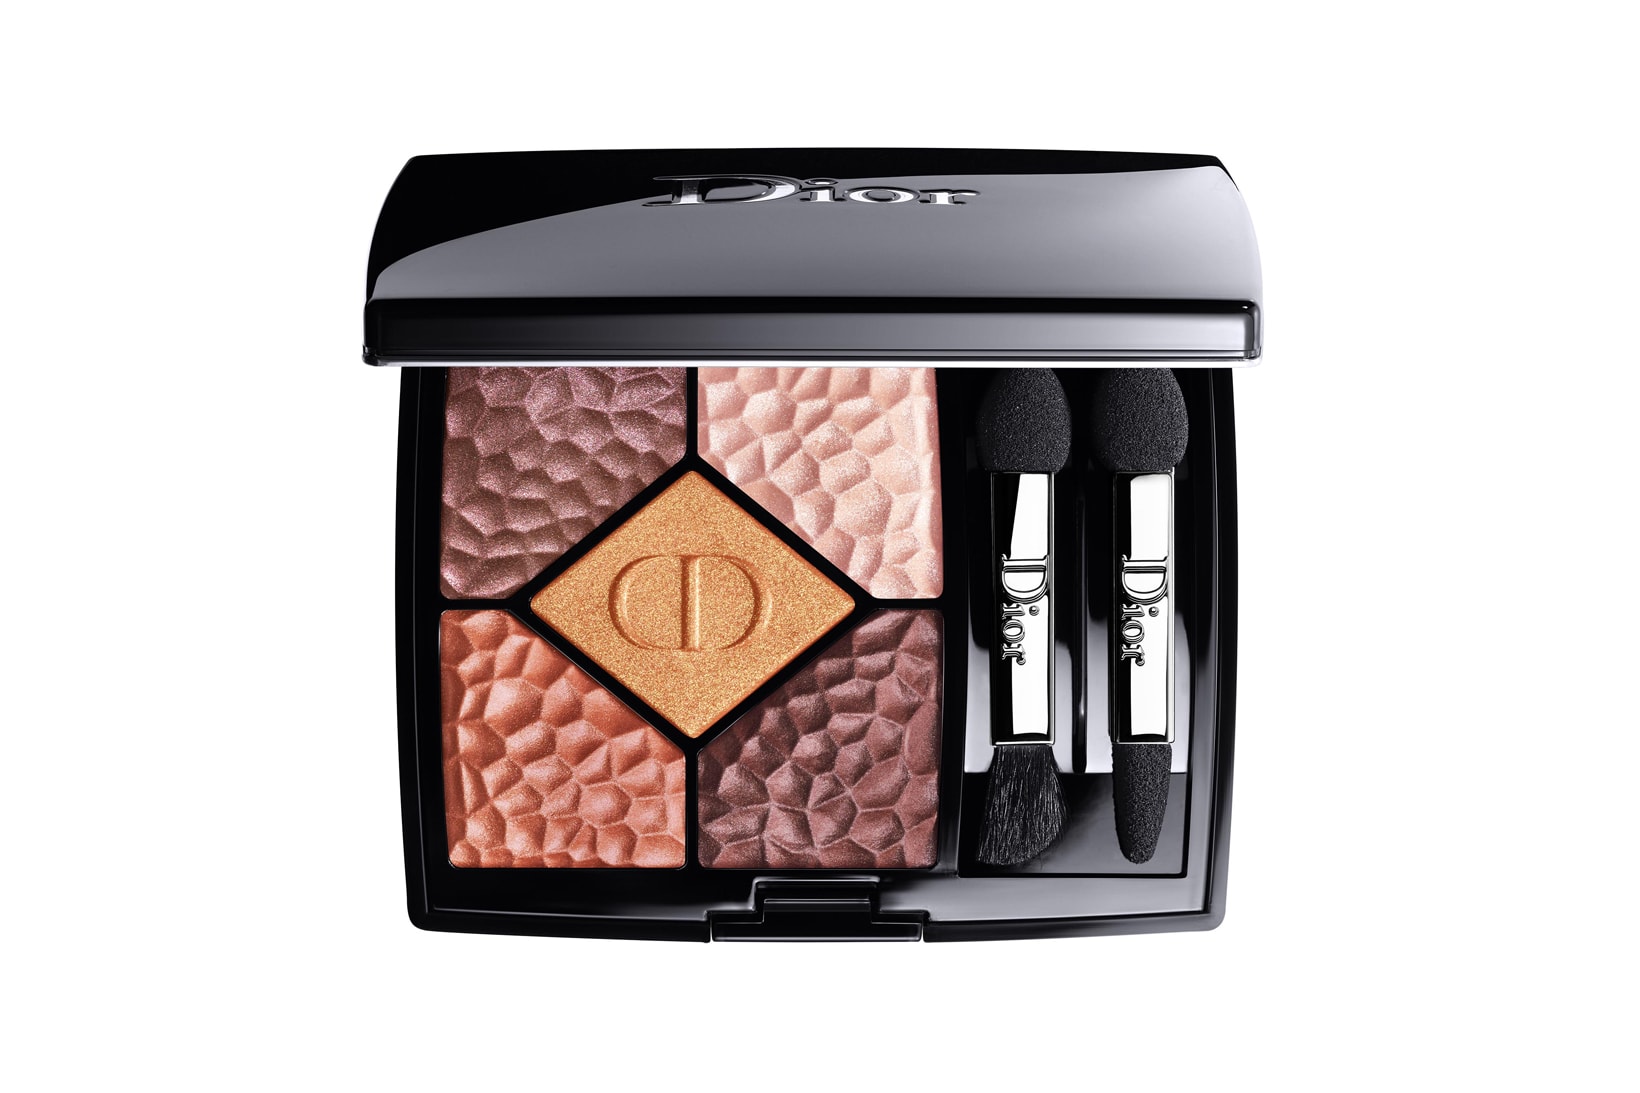 Dior Beauty Wild Earth Summer 2019 Collection Eyeshadow Palette